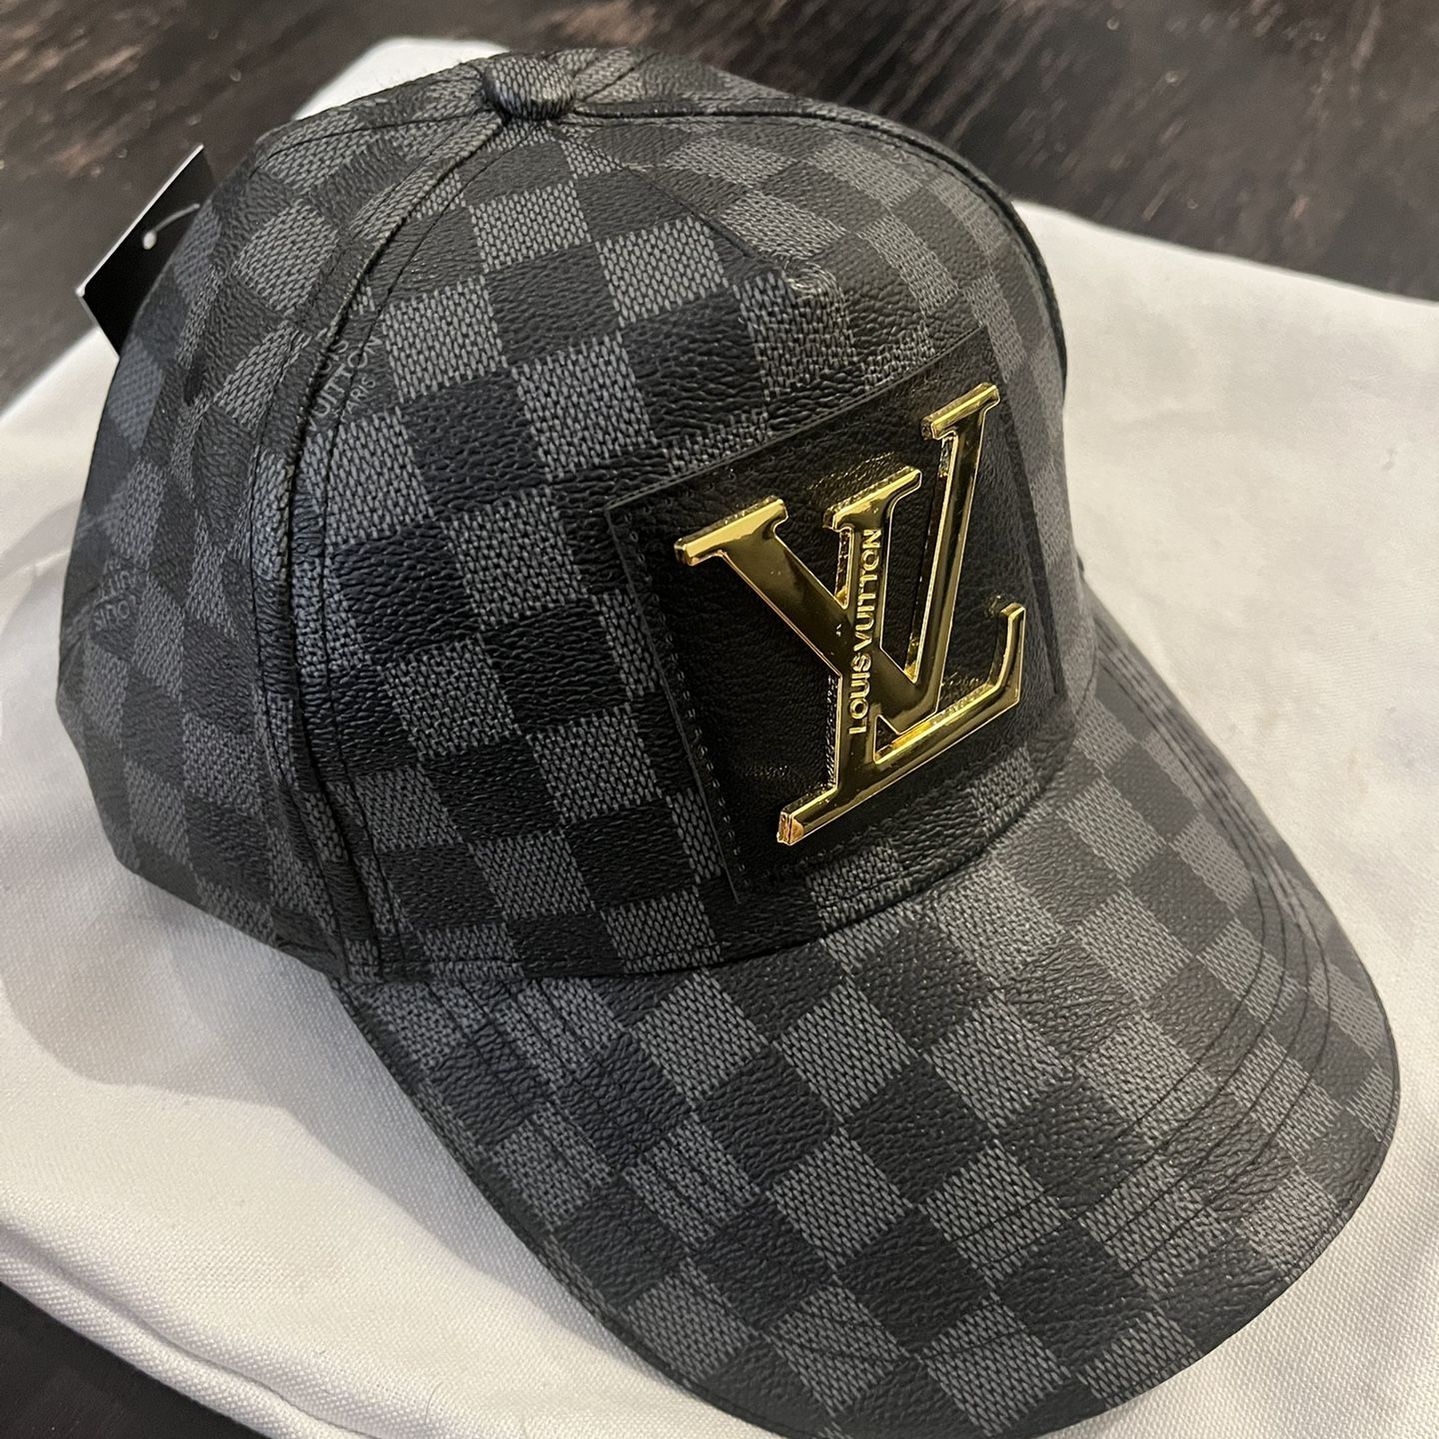 Louis Vuitton Hat for Sale in Livermore, CA - OfferUp